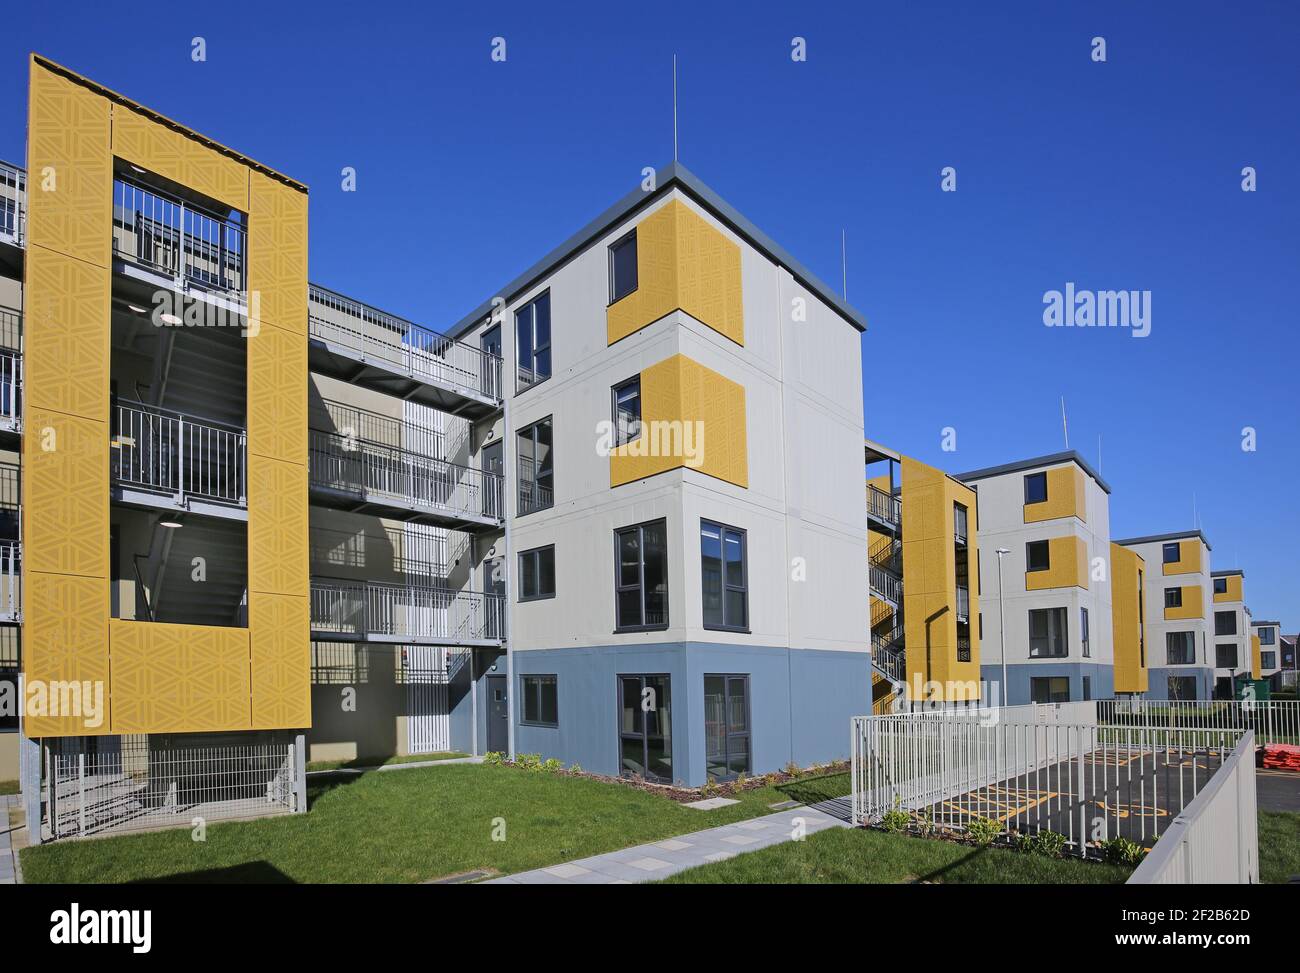 New housing development in Dagenham, London, UK. Built quickly and cheaply using modular construction to provide accommodation for homeless people. Stock Photo